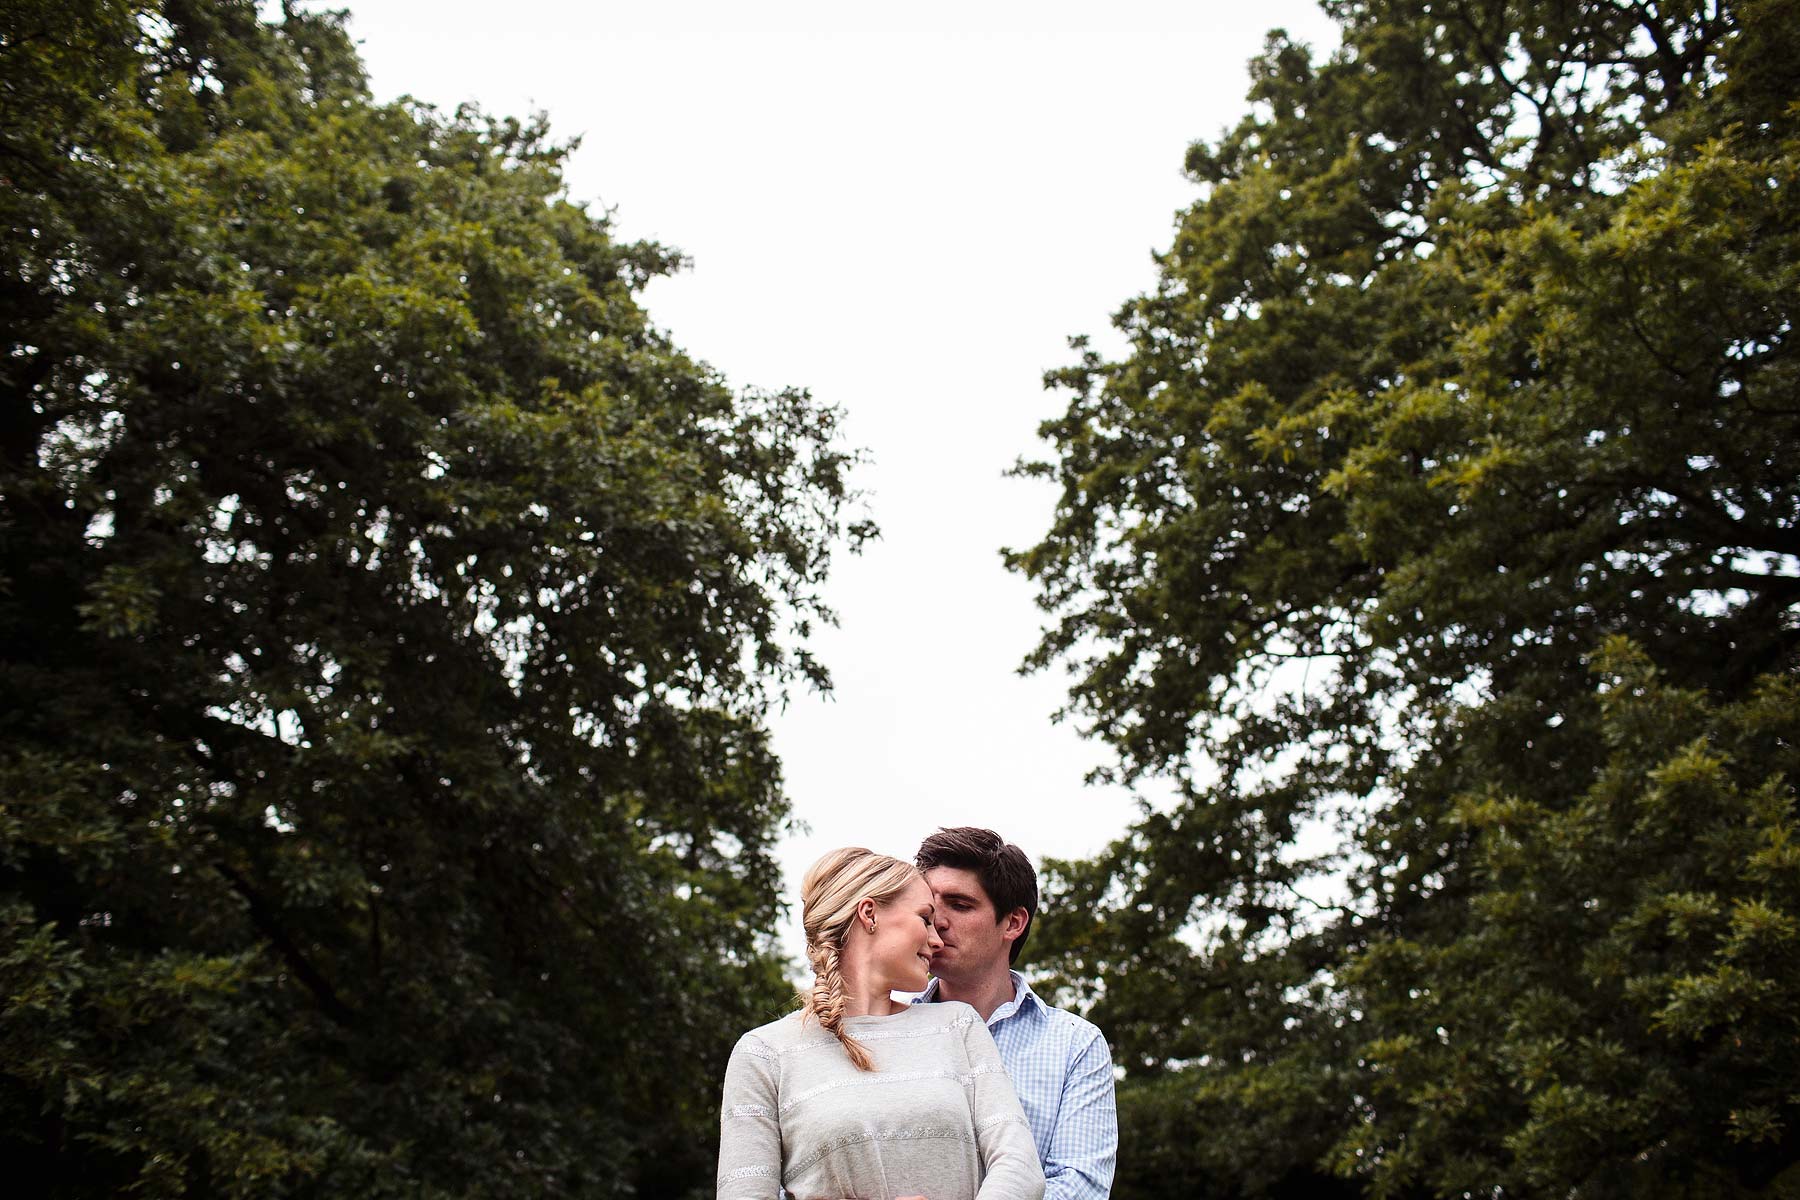 Beautiful choice for their engagement portrait session with photographs at Sandon Hall in Stafford by Sandon Hall Recommended Reportage Wedding Photographer Stuart James